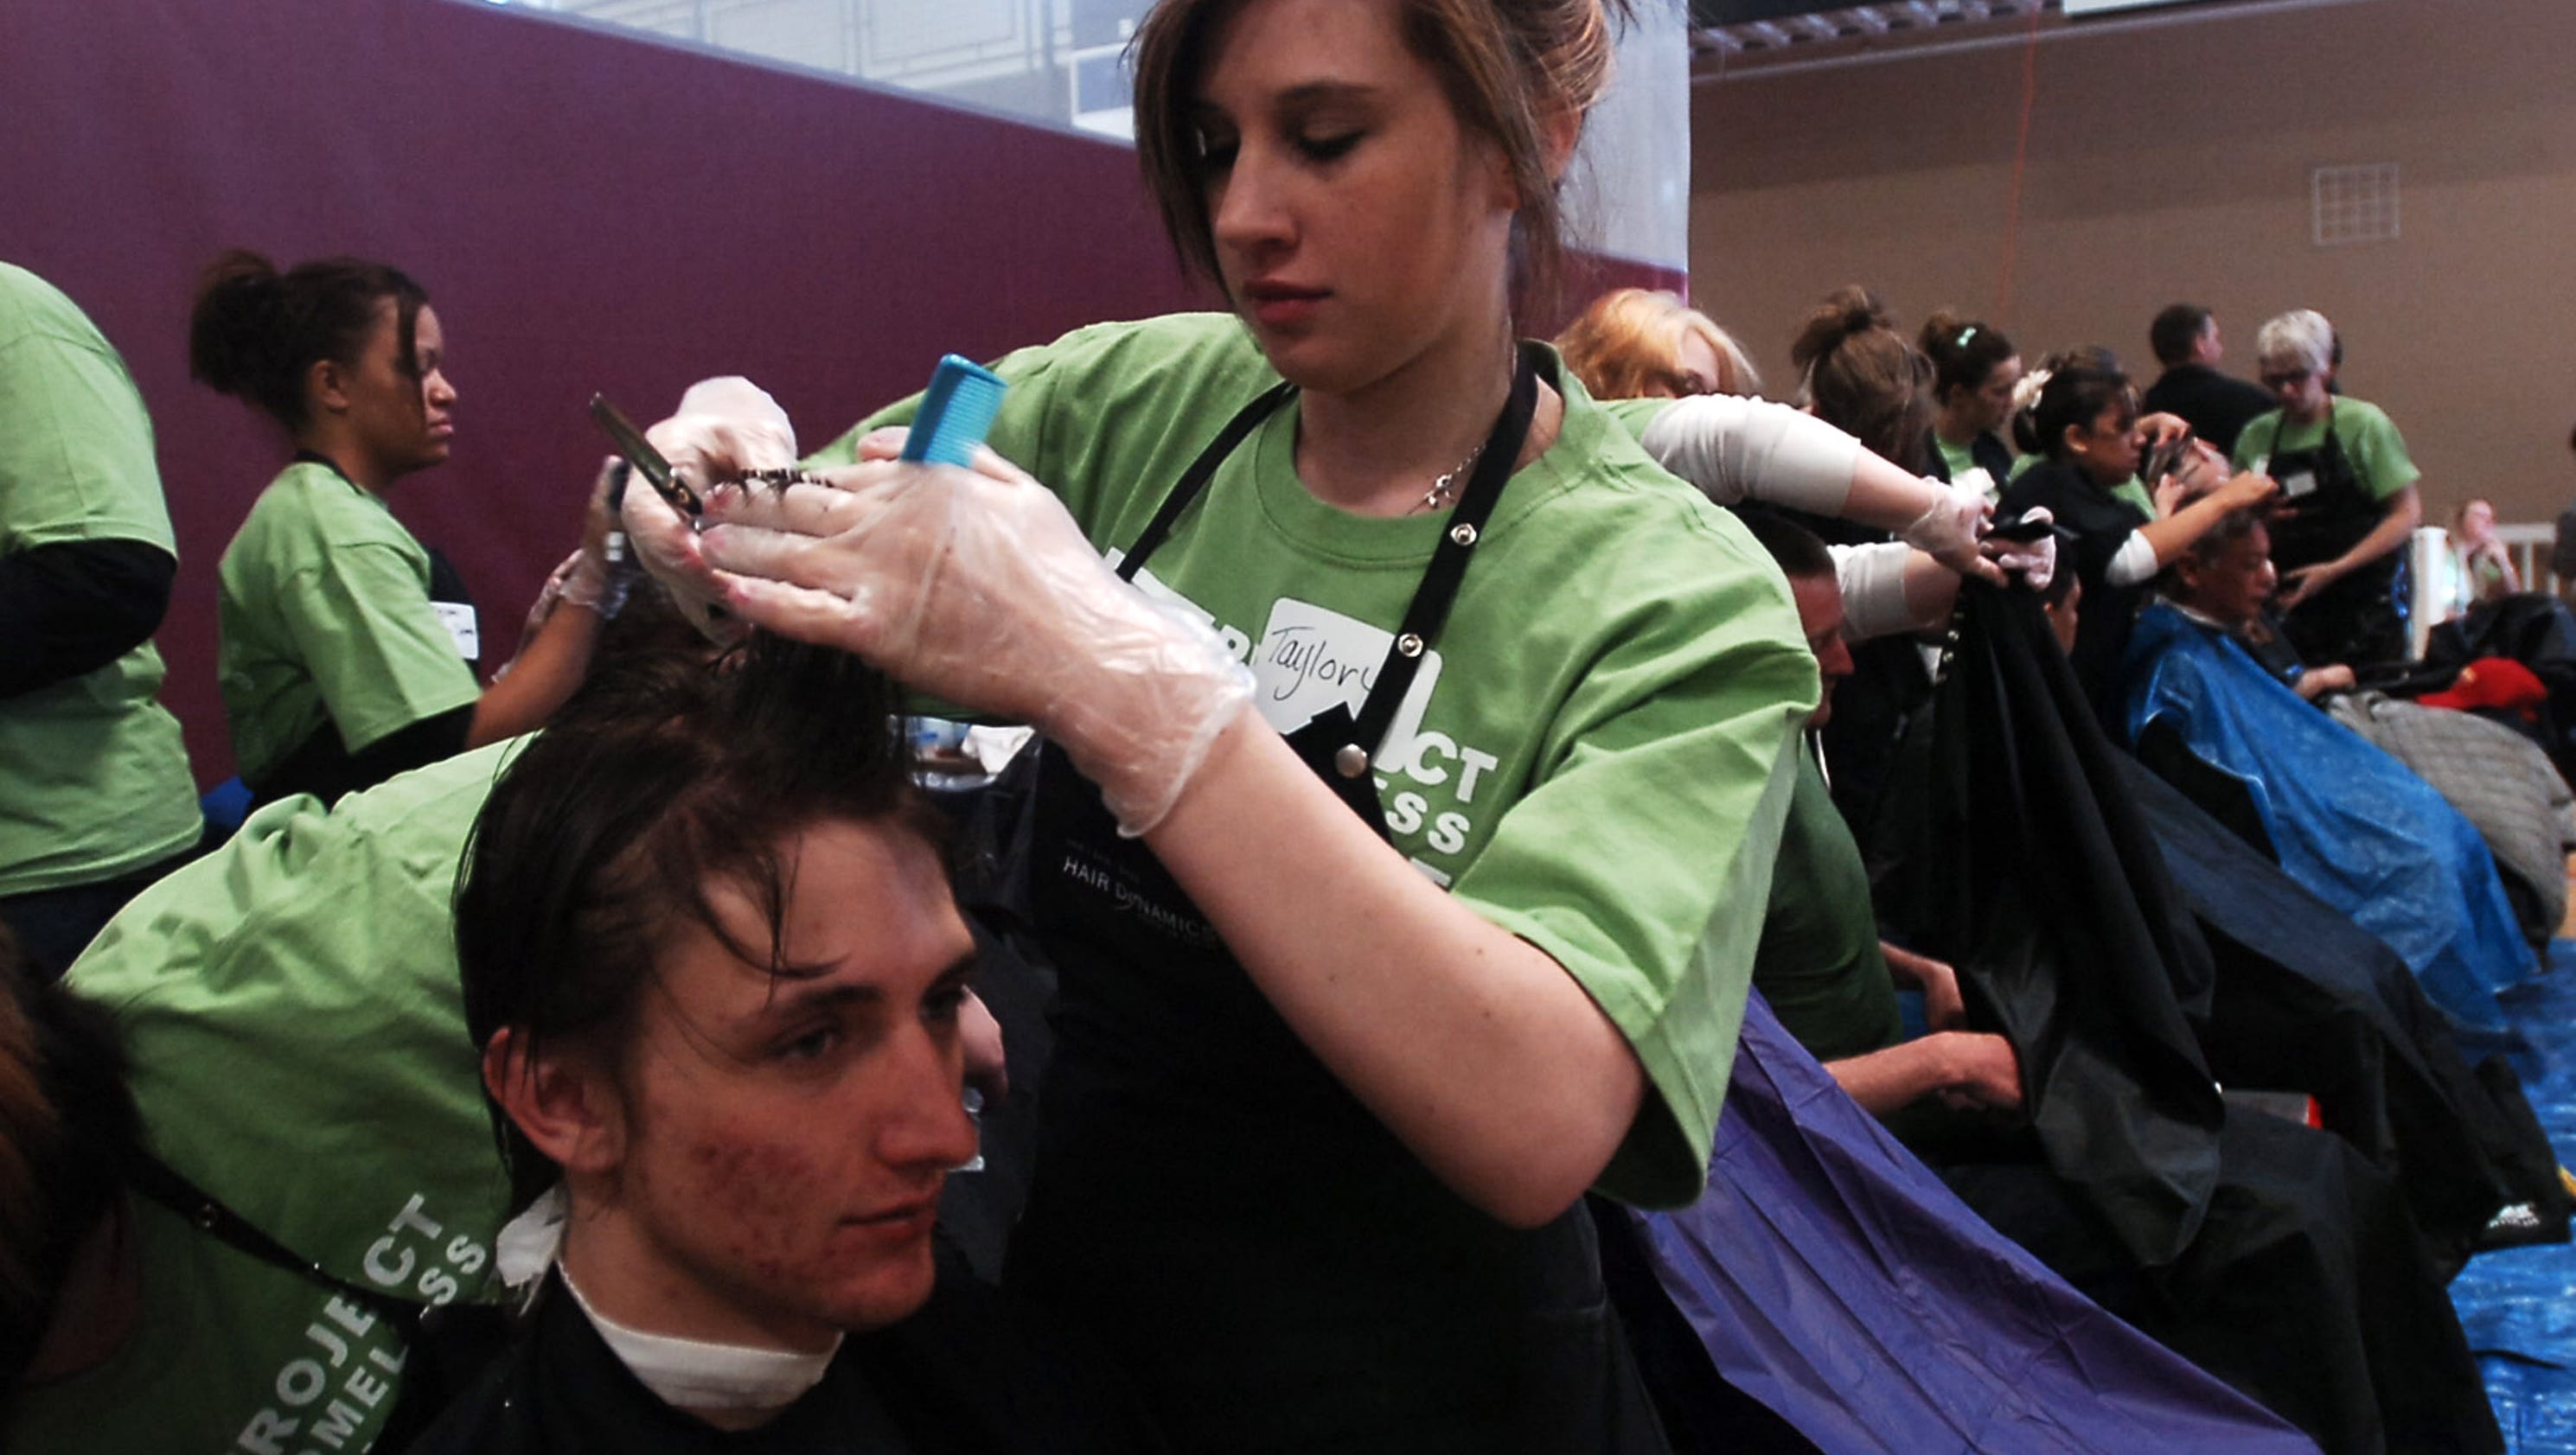 Fort Collins Cosmetology School Faces Uncertain Future